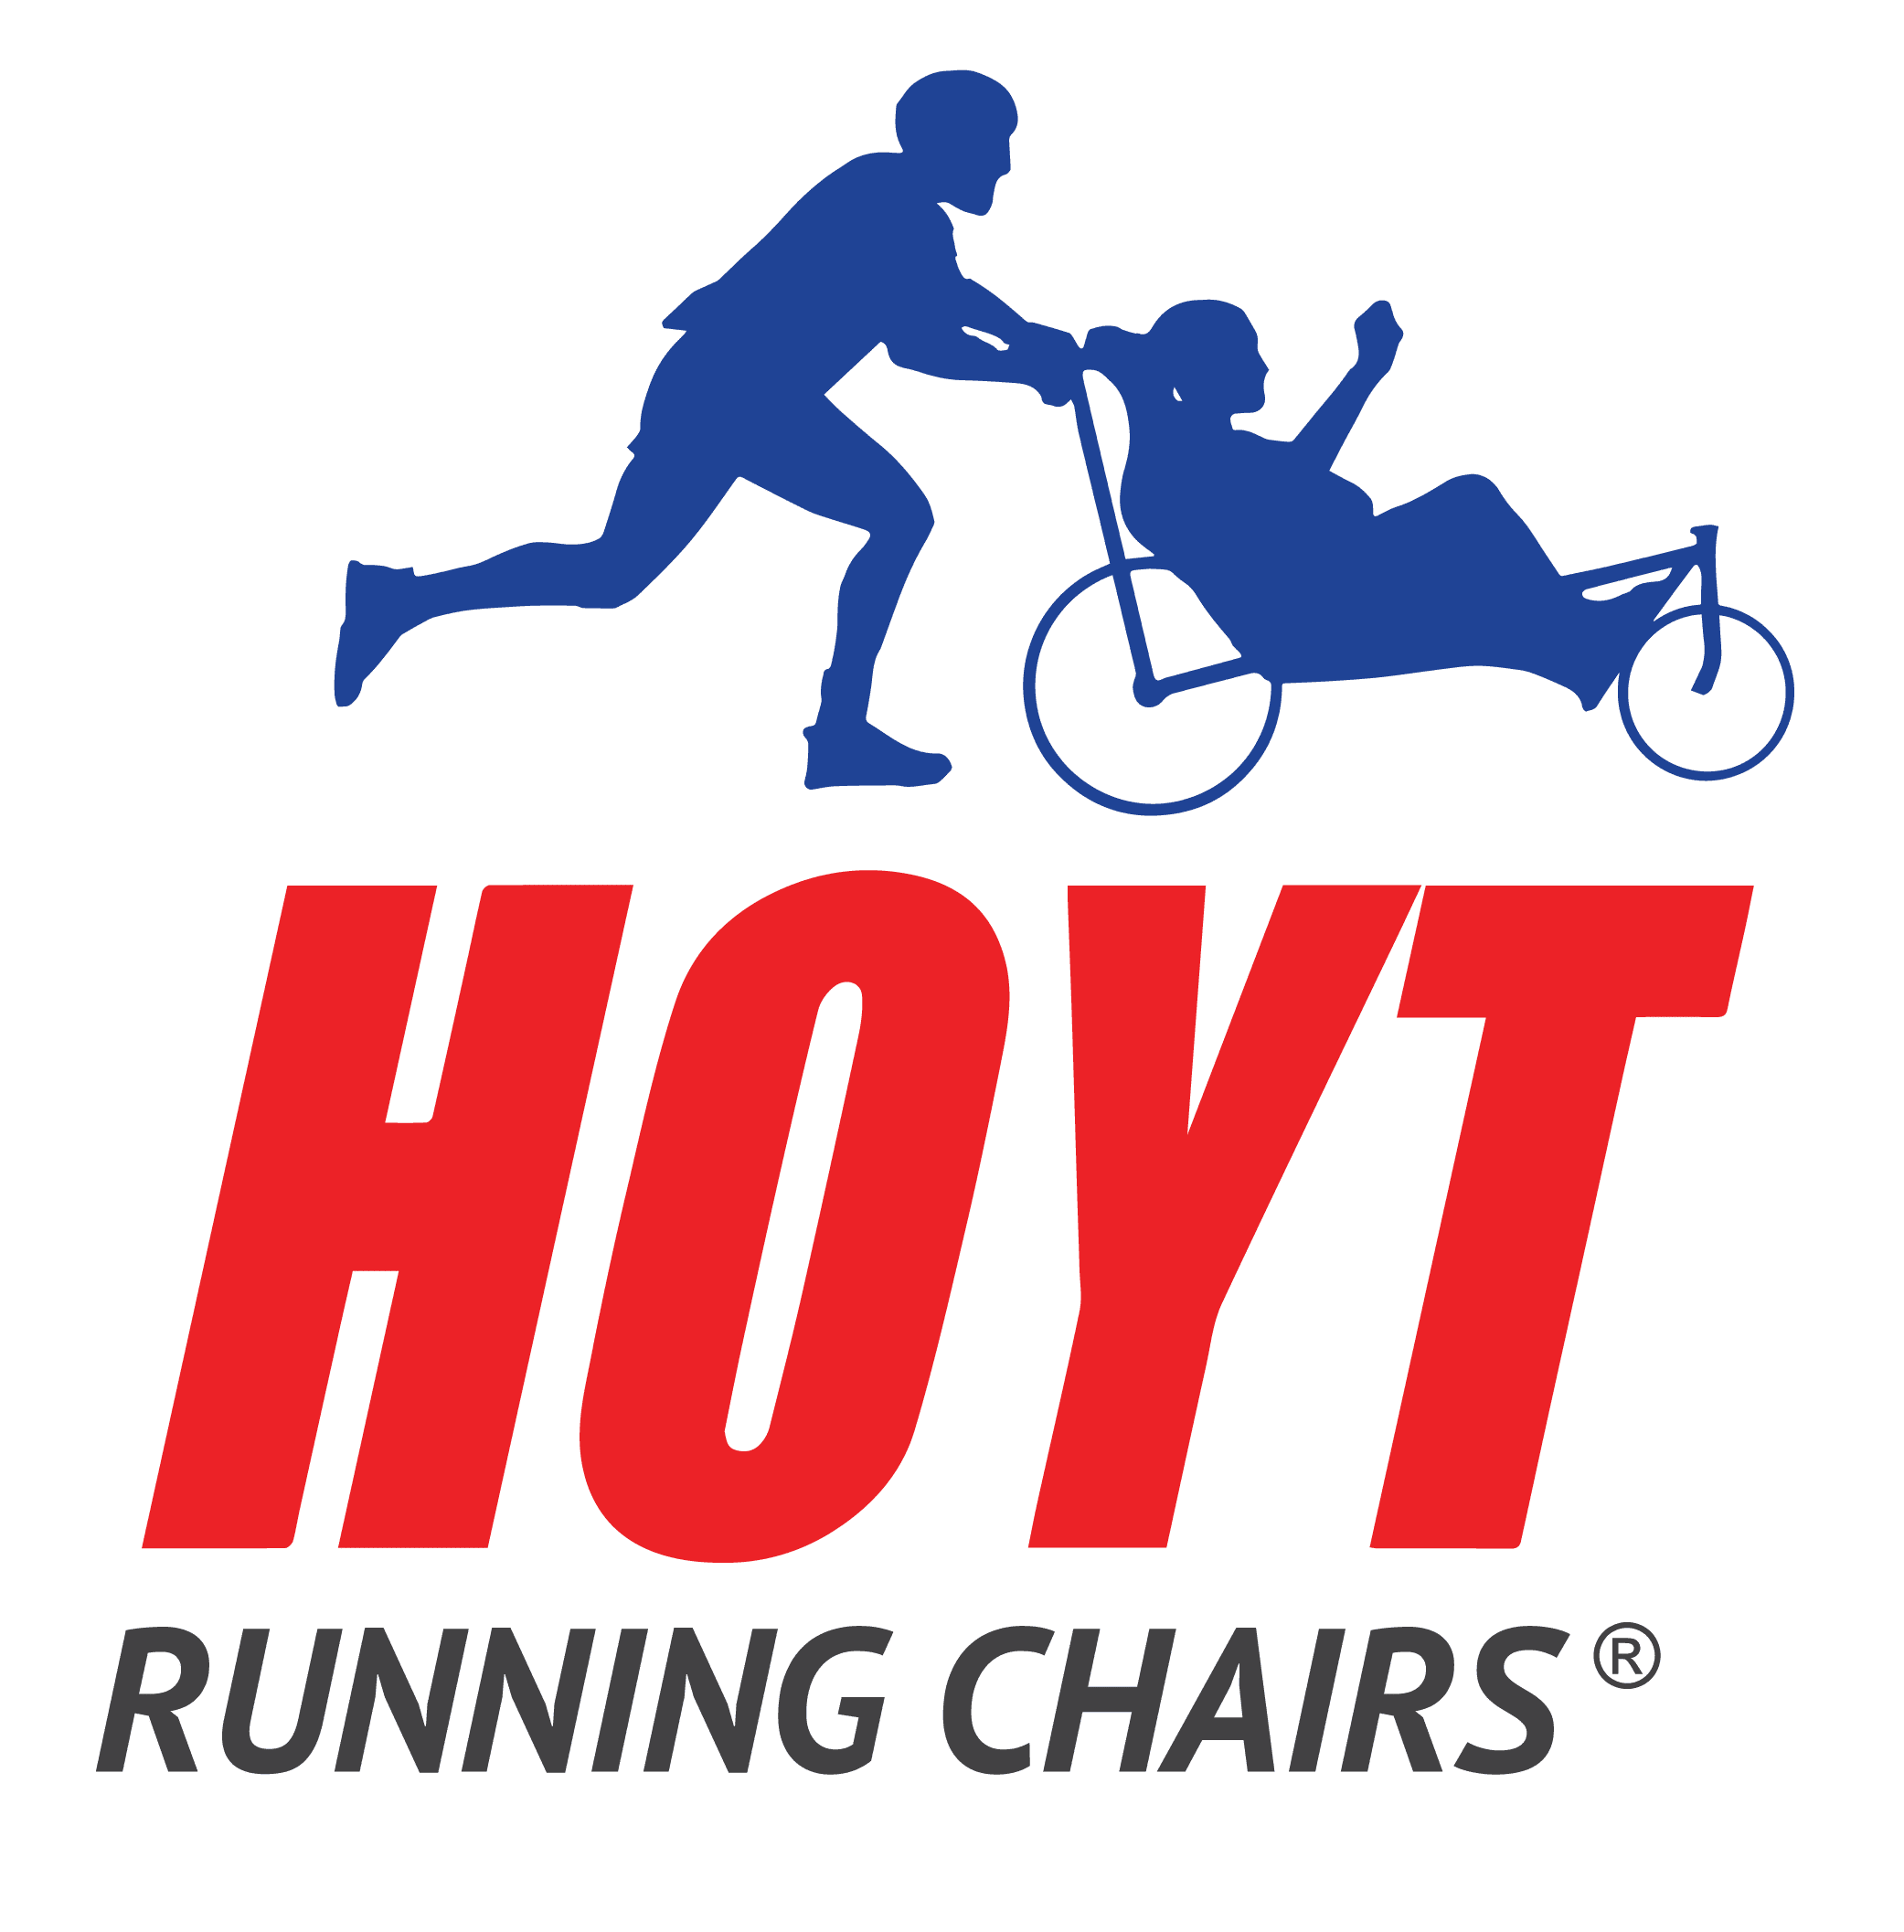 Hot Chairs